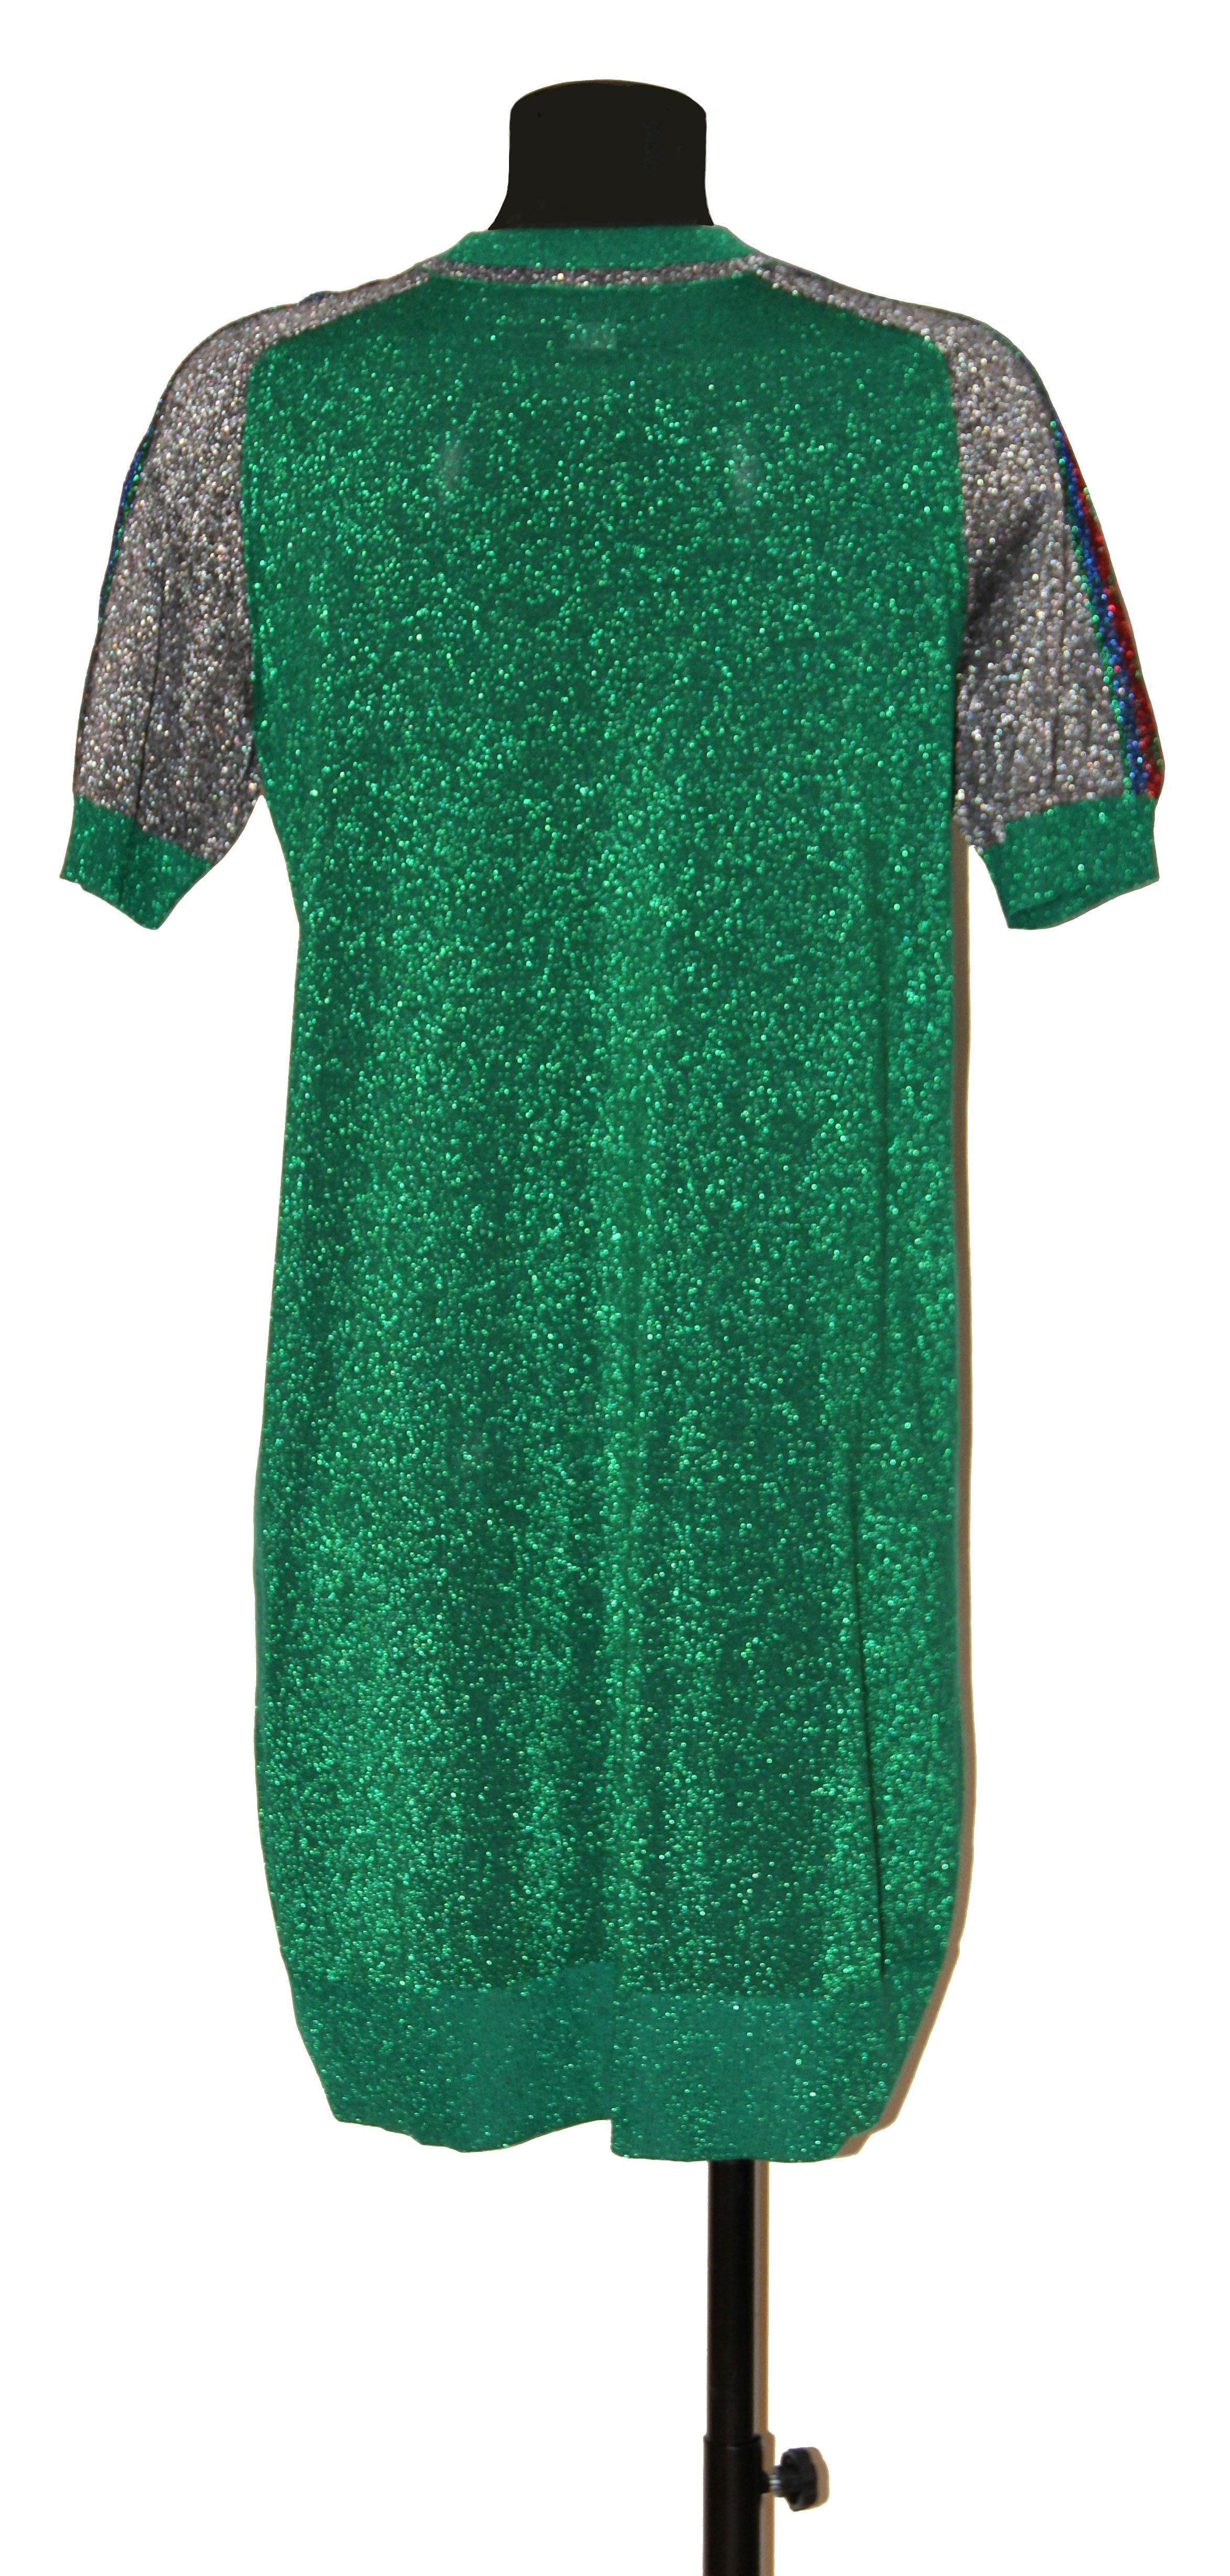 This pre-owned but new green metallic dress has a sporty chic look !
It features the red and green Gucci Ruabn stripe and logo motifs down the shoulders. 
It has a round neck, short sleeves and is cut for a knee-length T-shirt silhouette.

Fabric: